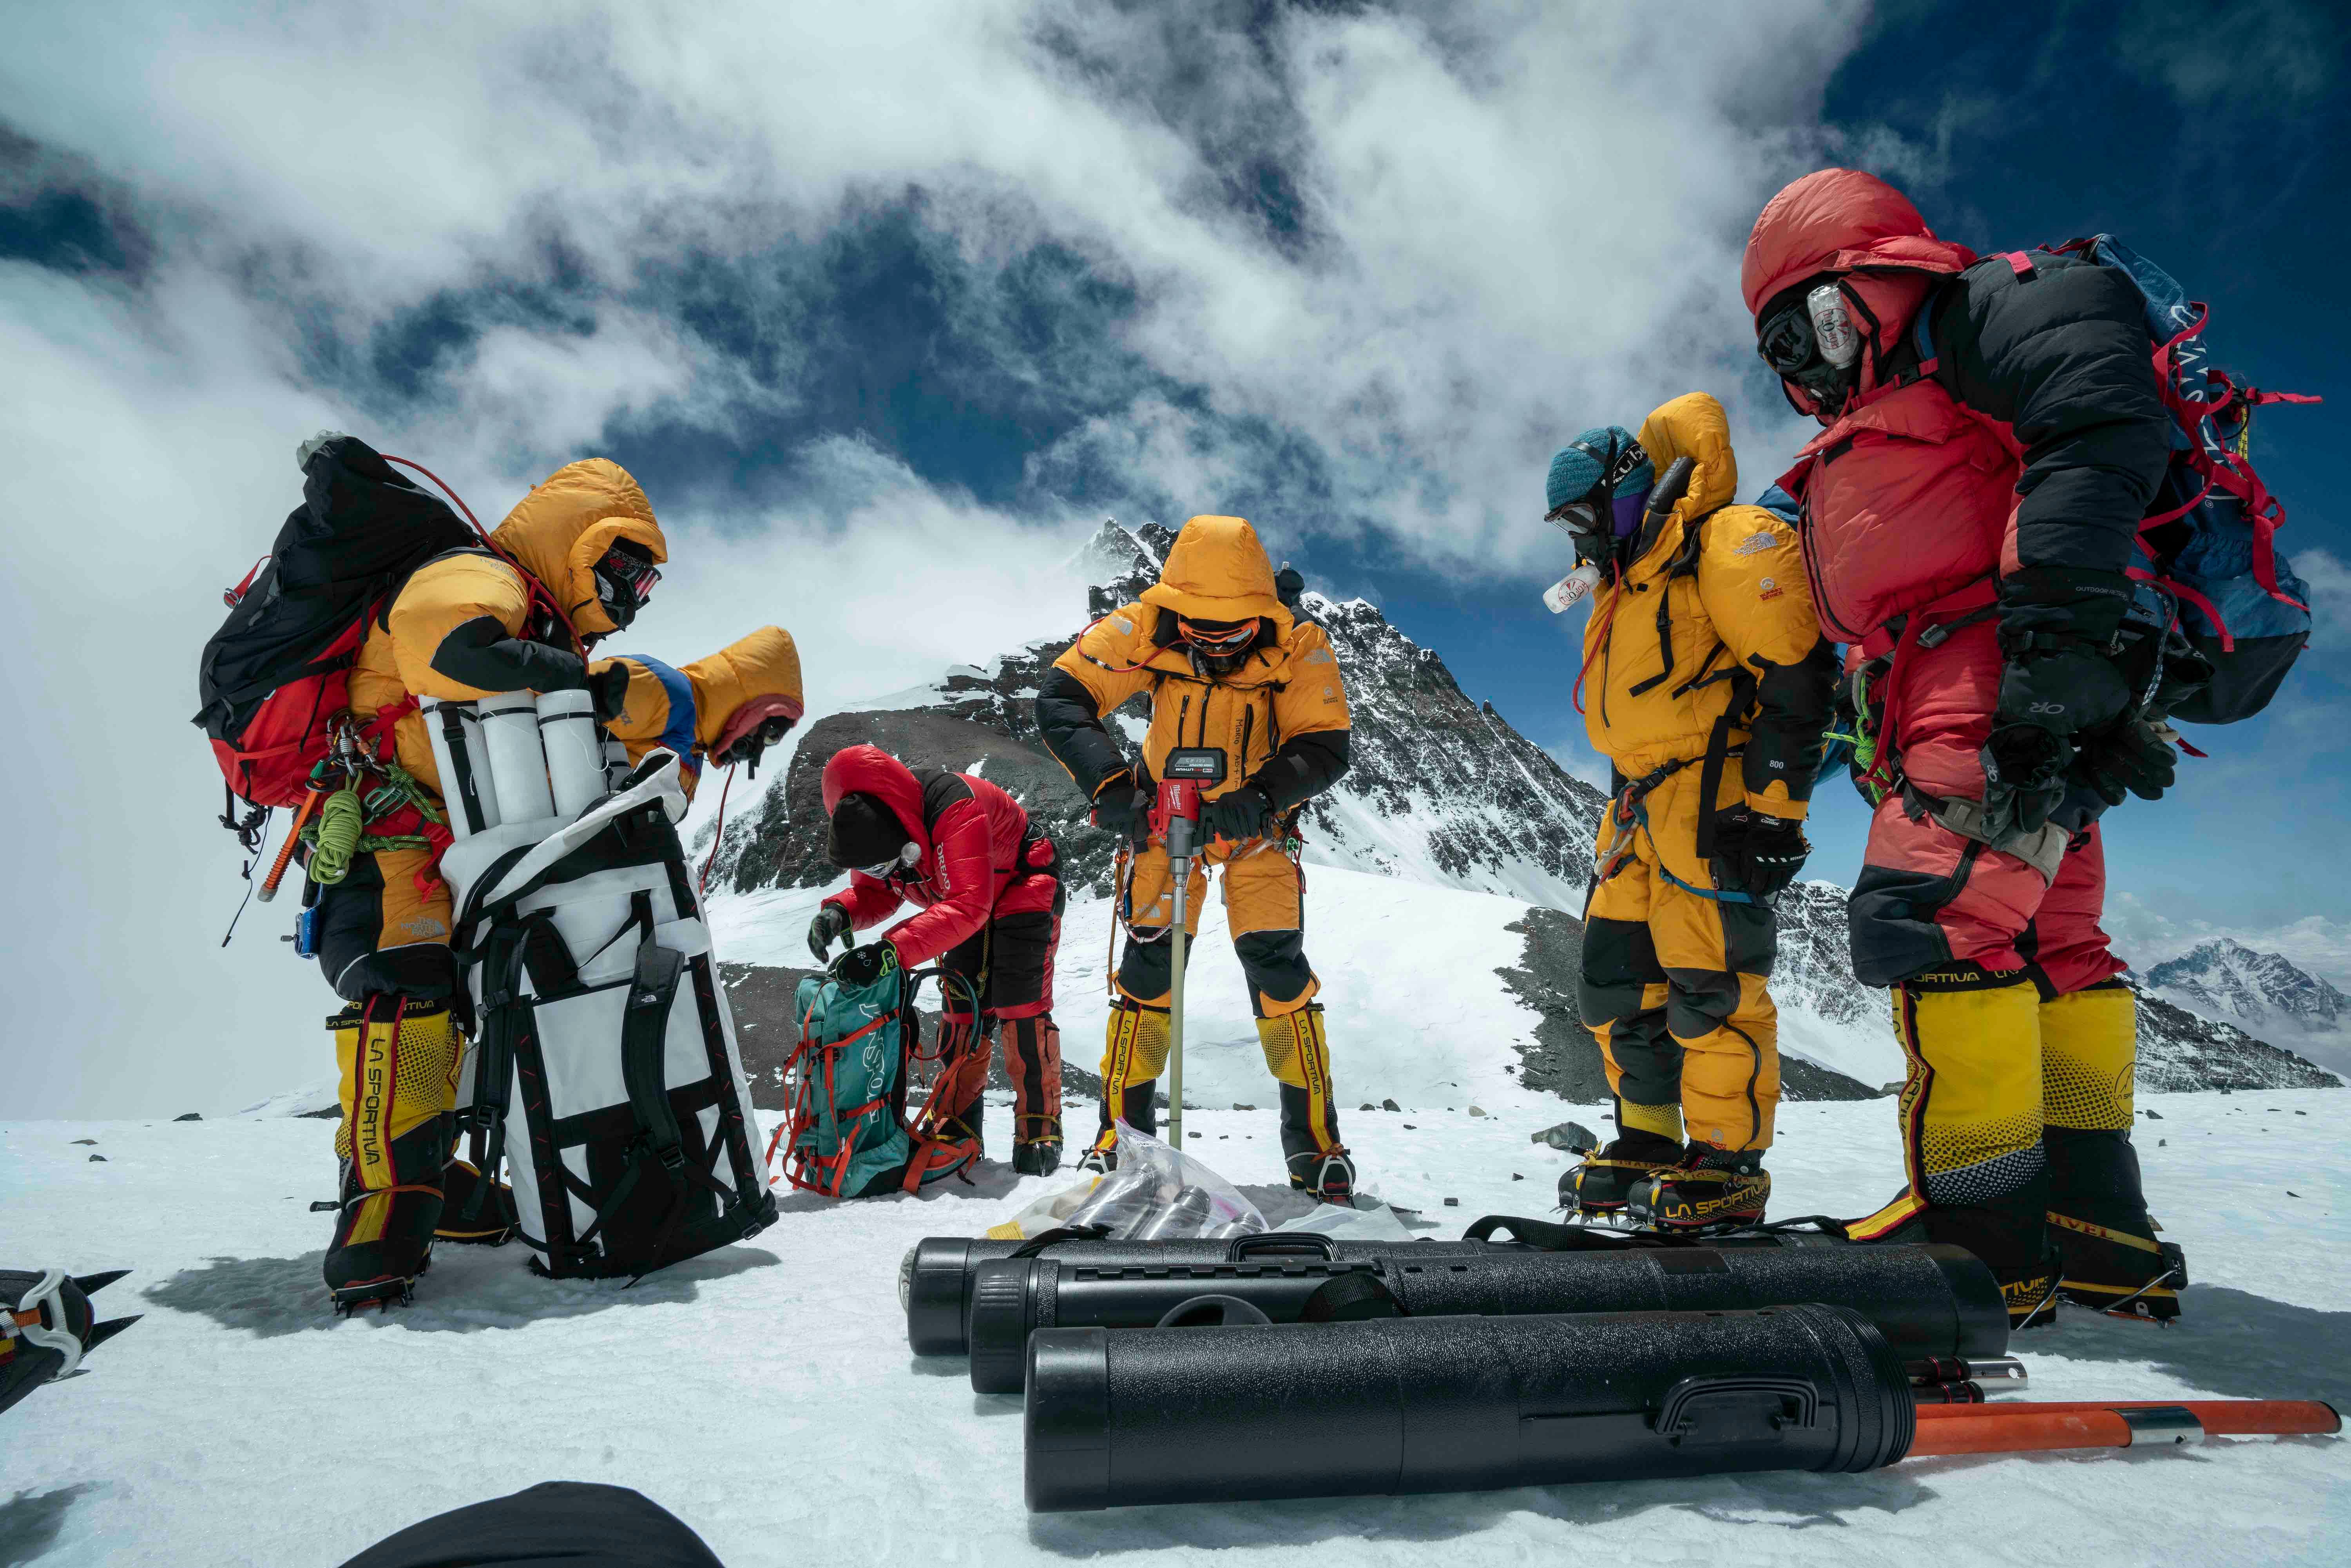 Mariusz Potocki leads the drilling of an ice core at the South Col with help from the high-altitude climbing team.